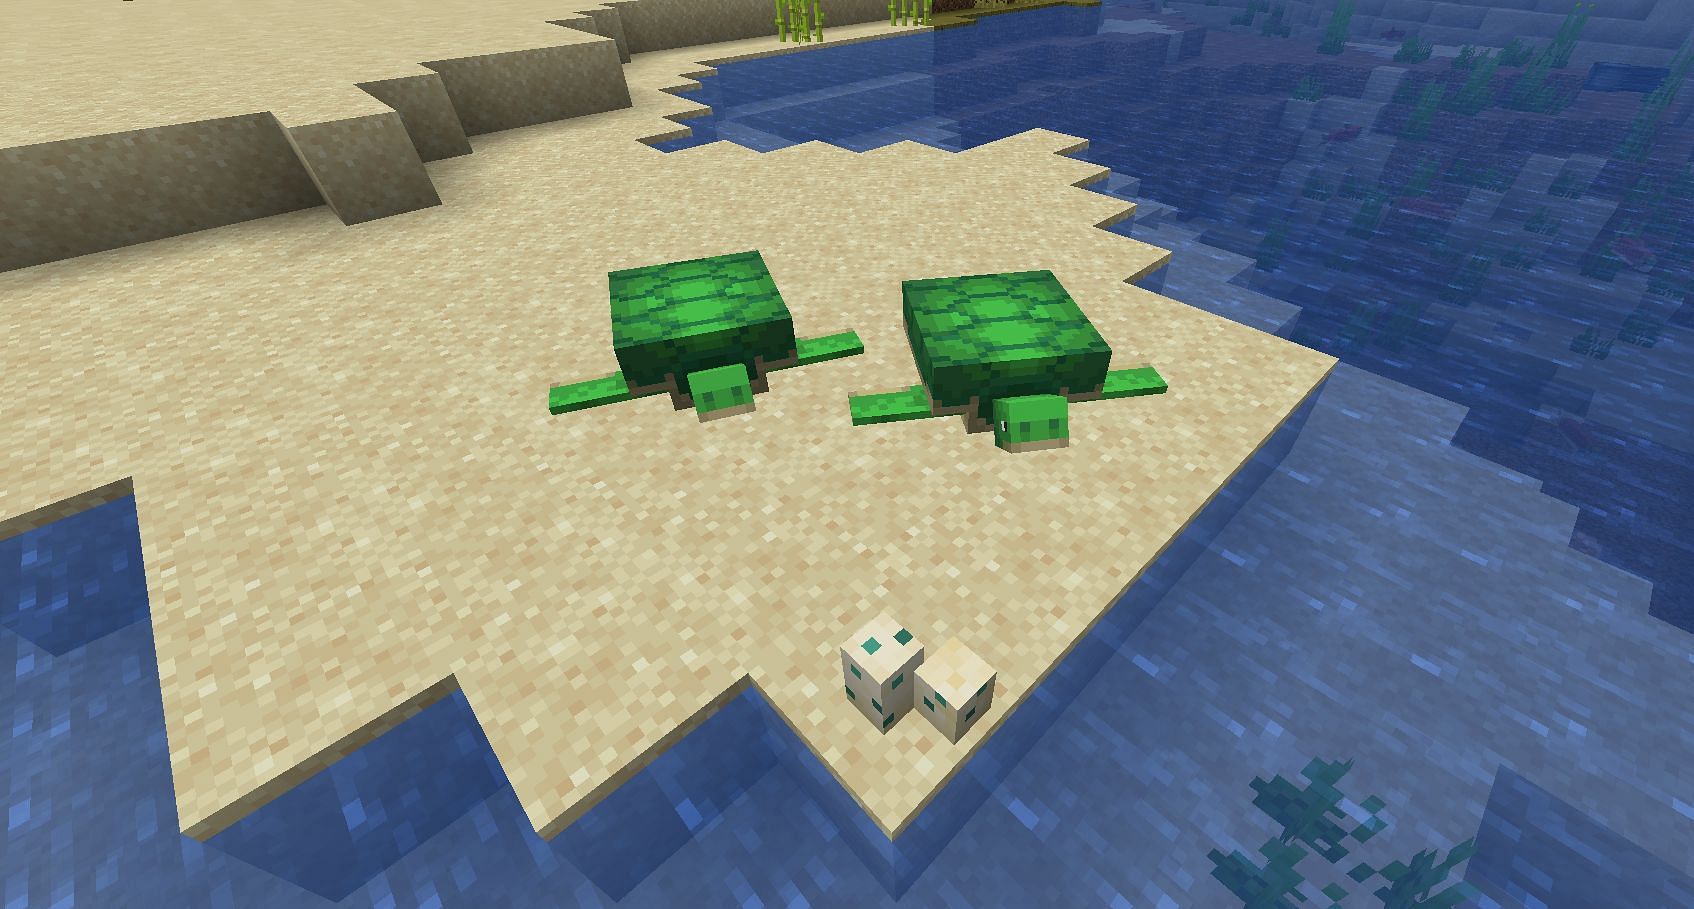 Turtles with their eggs on a beach (Image via Minecraft)